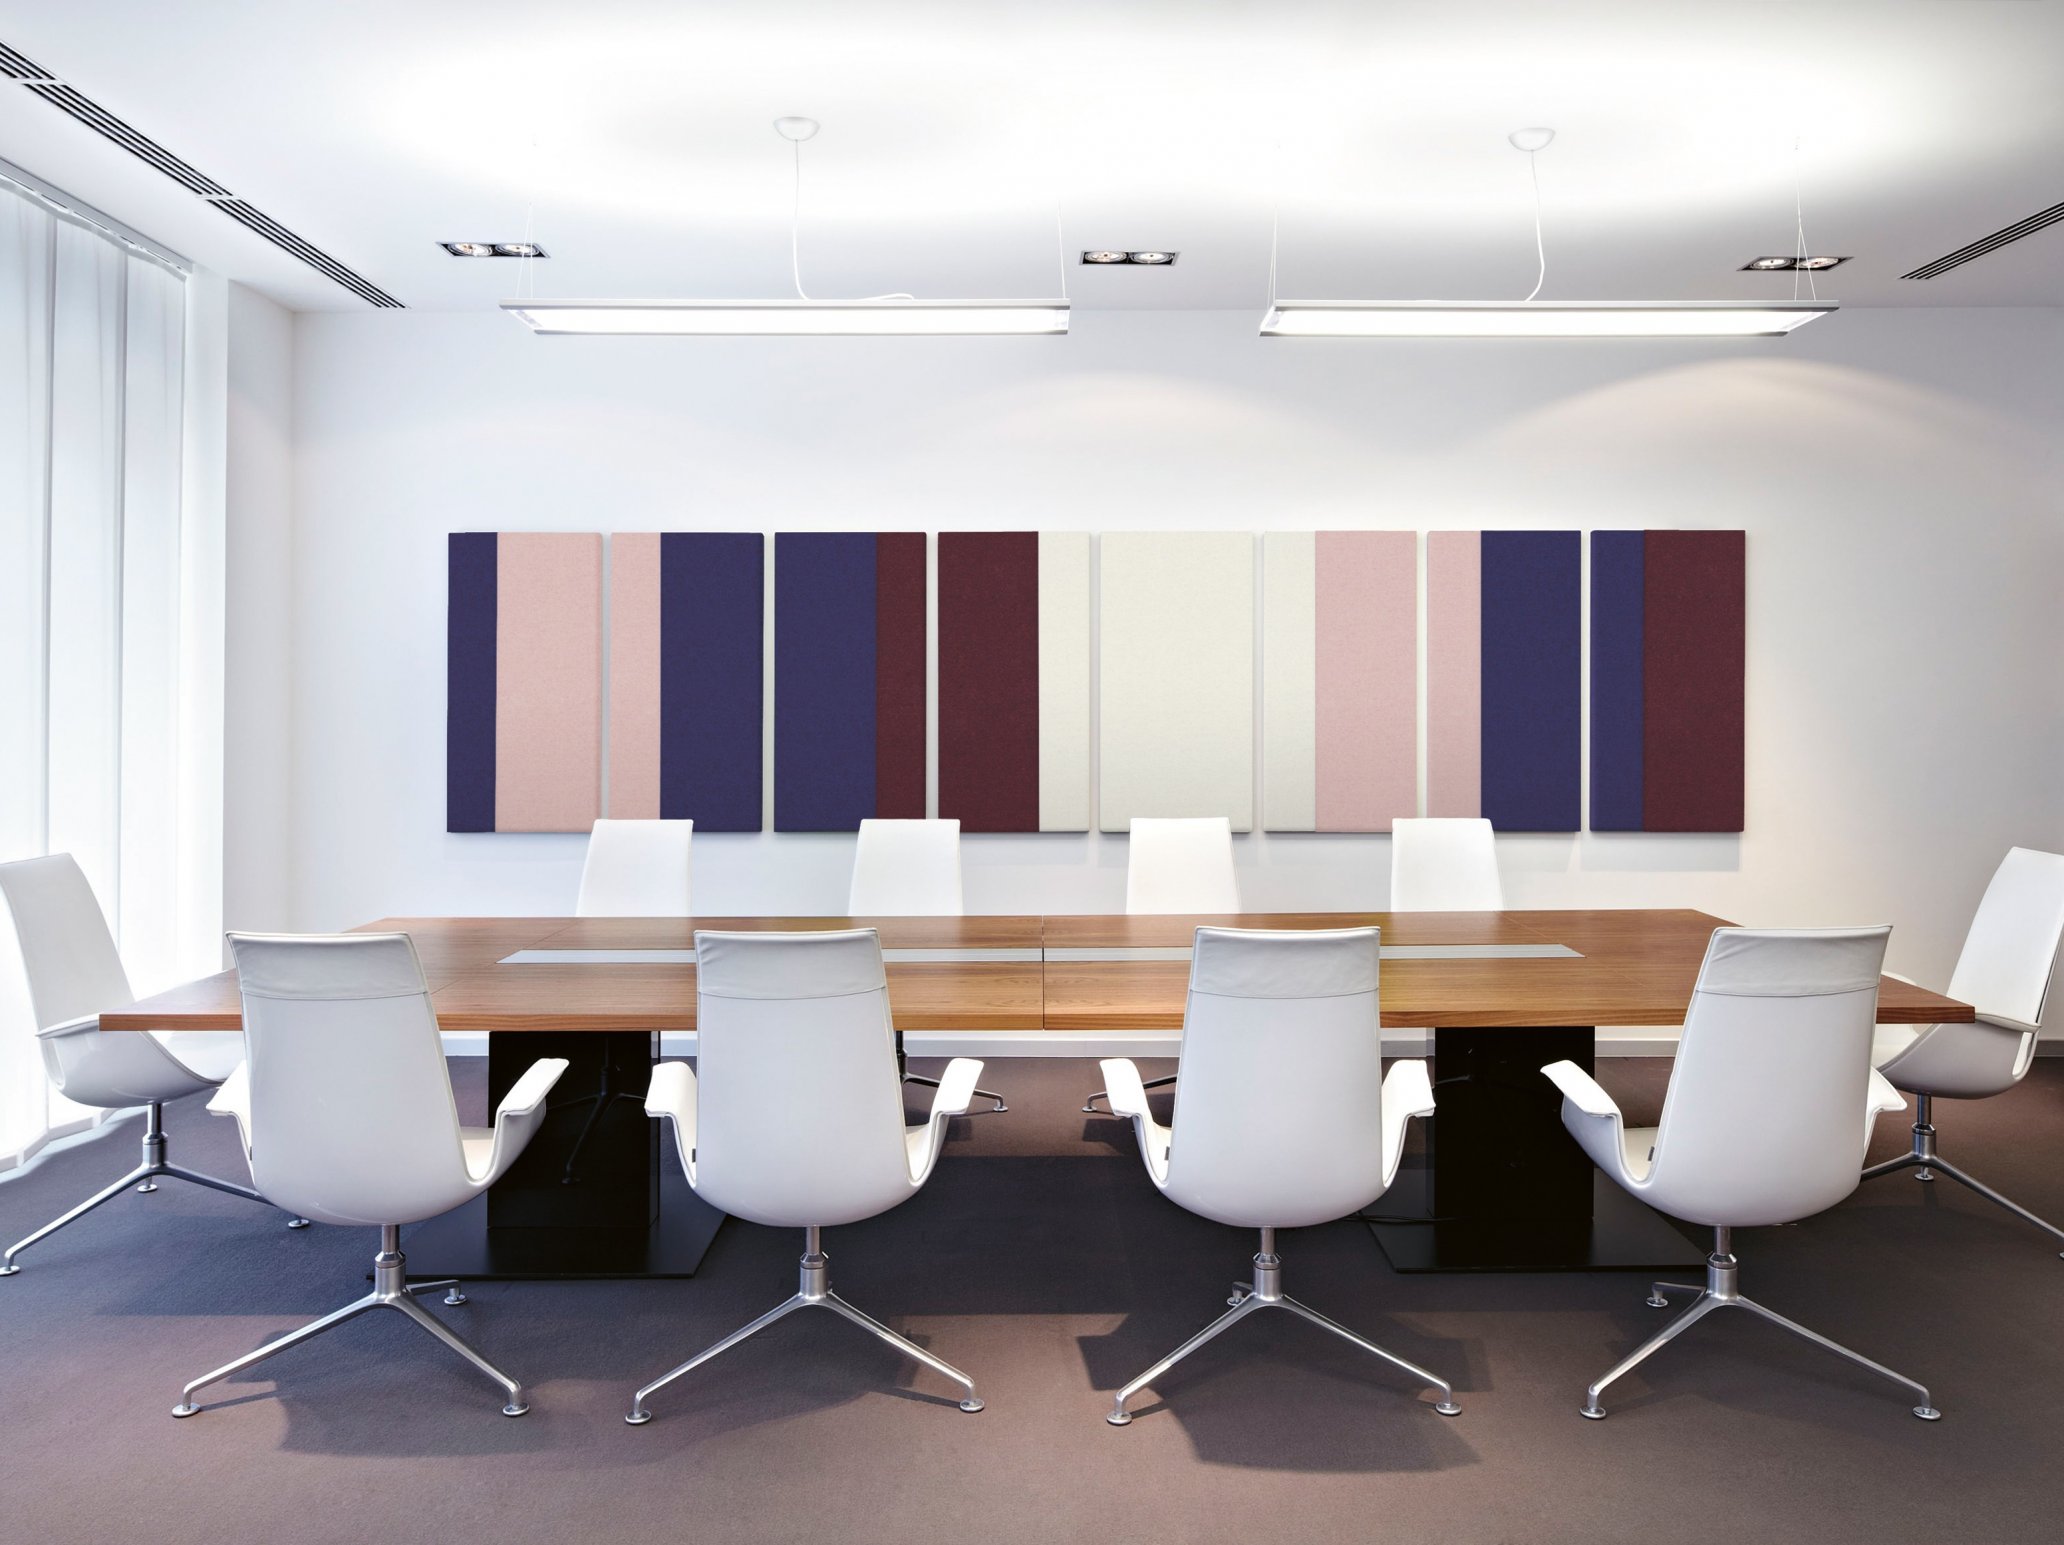 Optimum Acoustics in the Office conference room